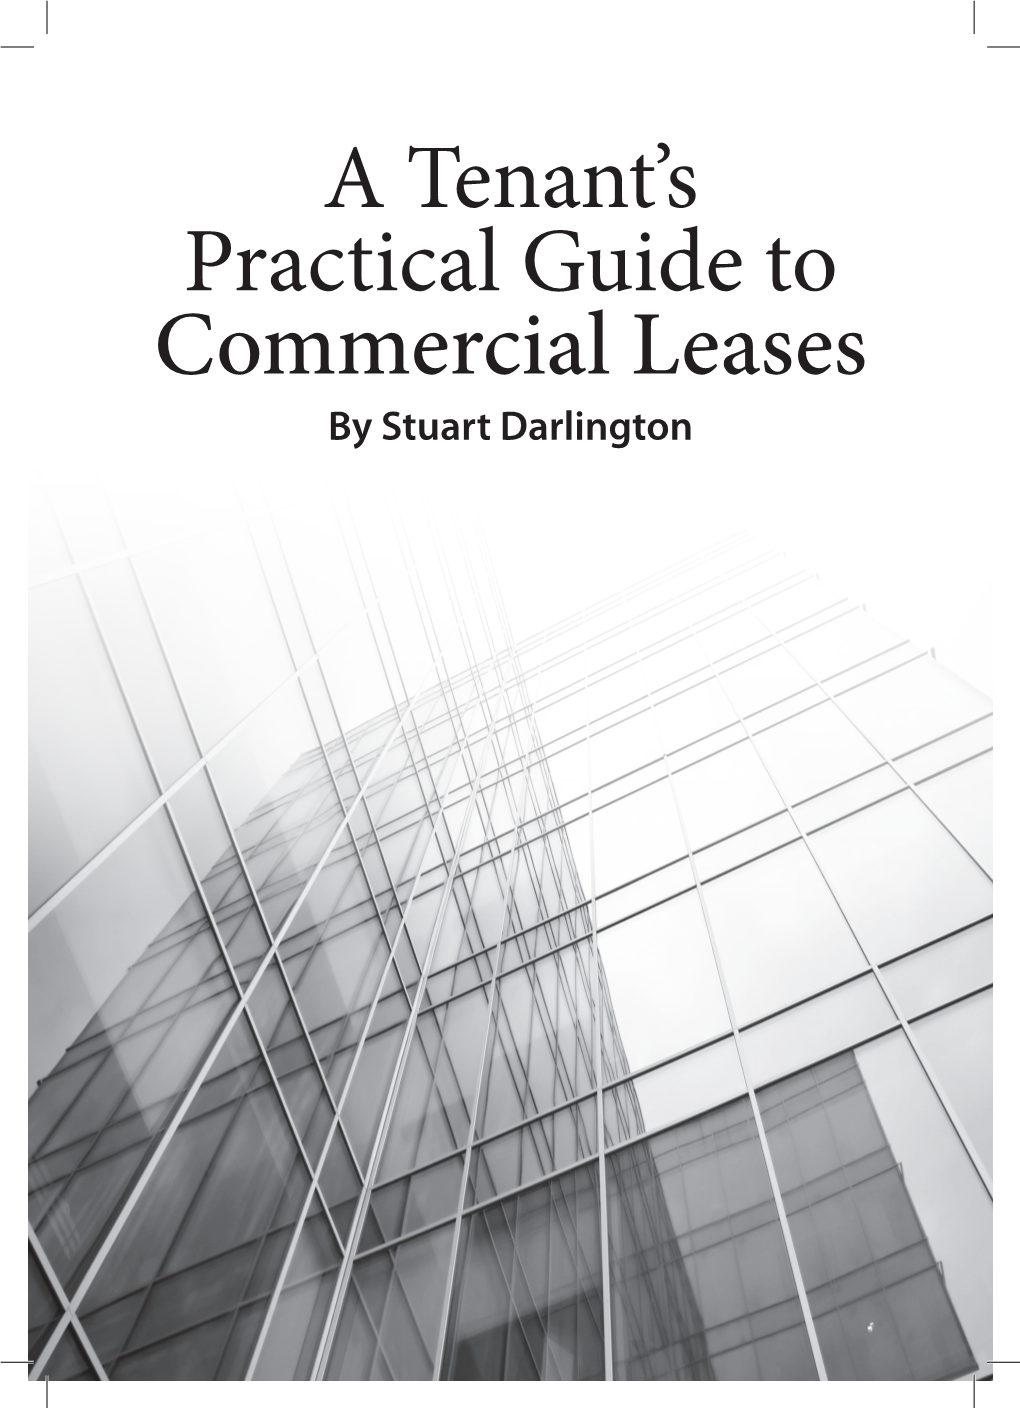 A Tenant's Practical Guide to Commercial Leases